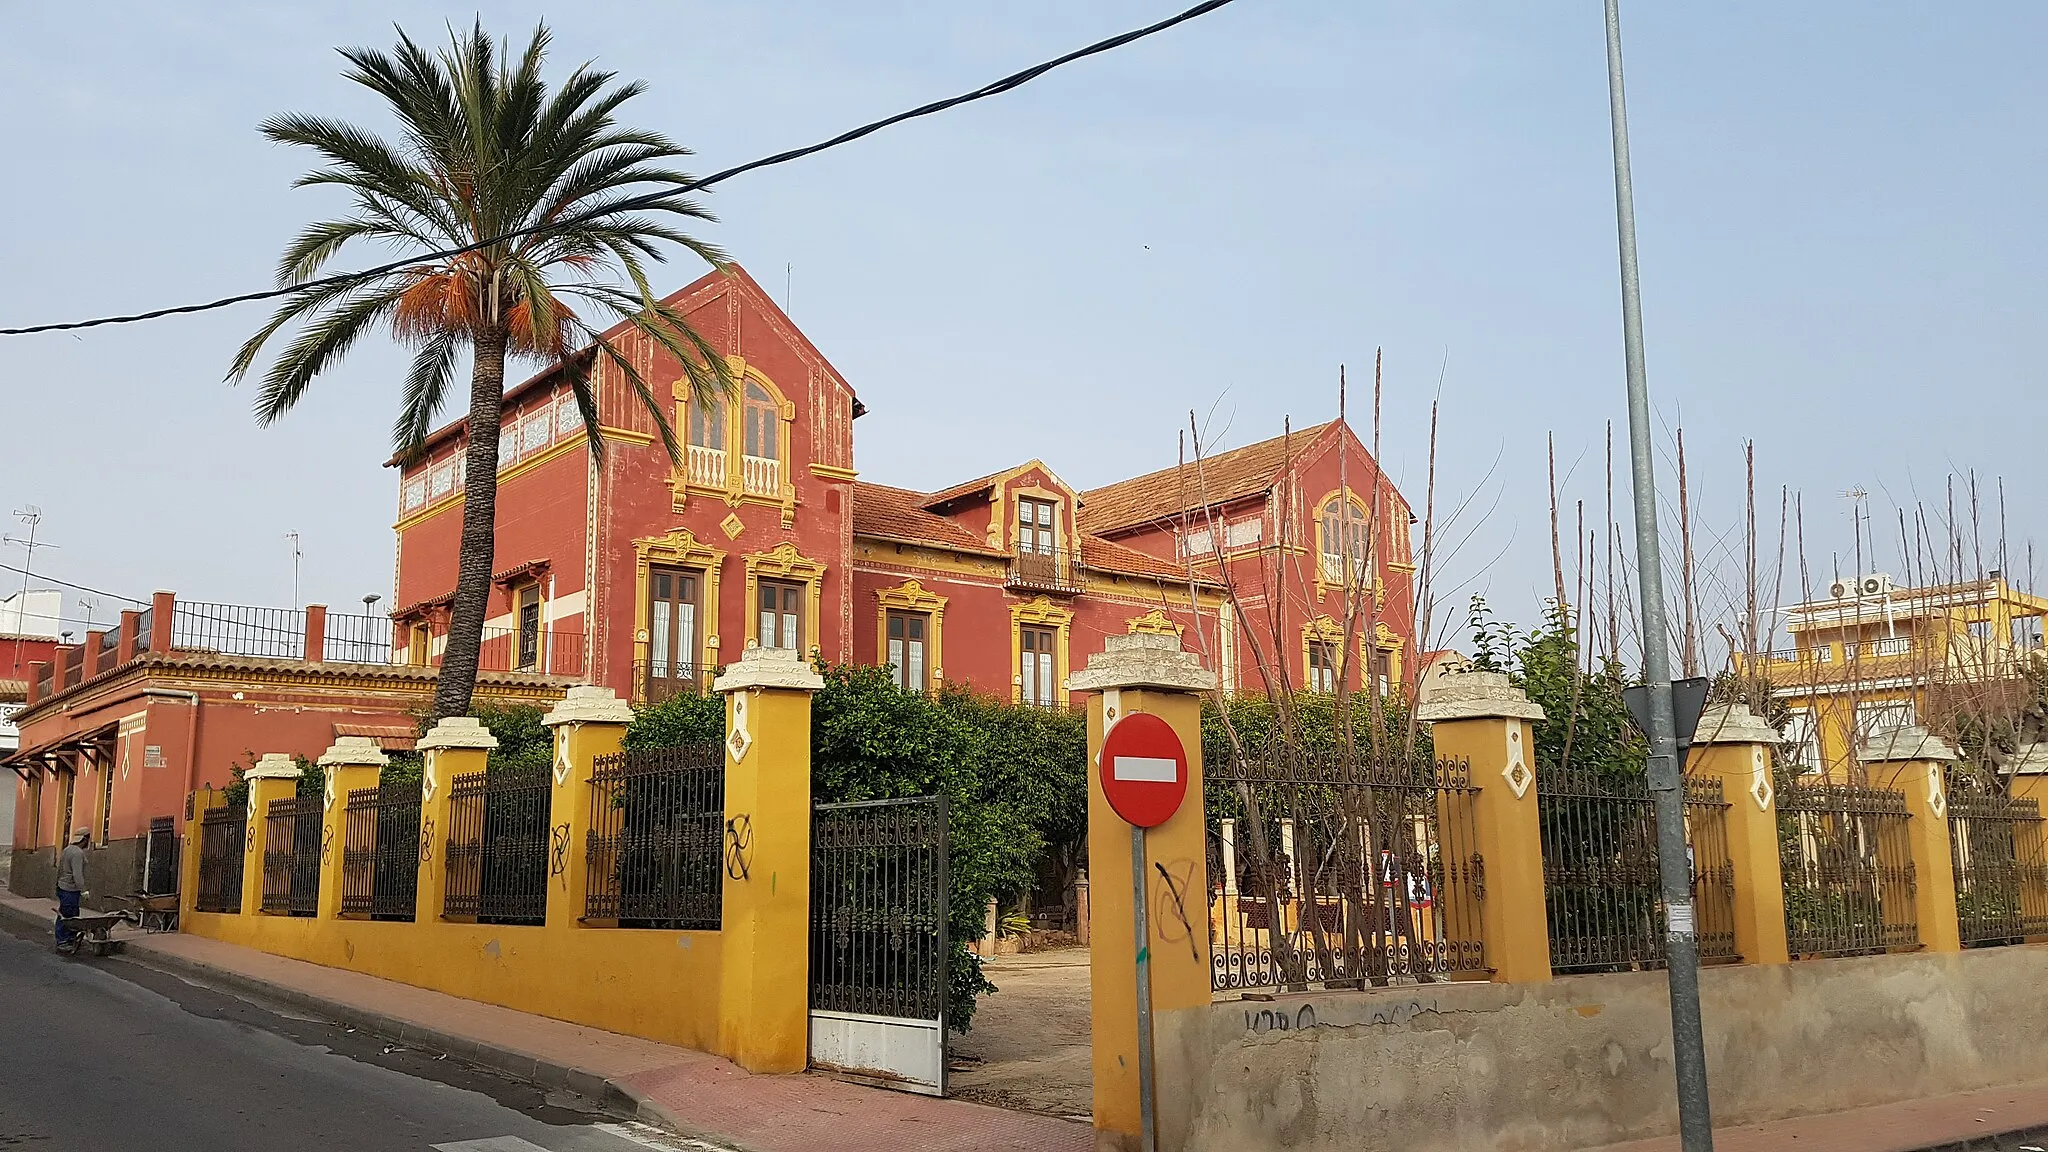 Photo showing: Fence and facade of Villa Esperanza, a mansion located in the Barrio de Peral of Cartagena (Spain). The building was built in 1902 possibly by the architect Francisco de Paula Oliver Rolandi, commissioned by the businessman Sandalio Alcantud Oliver.